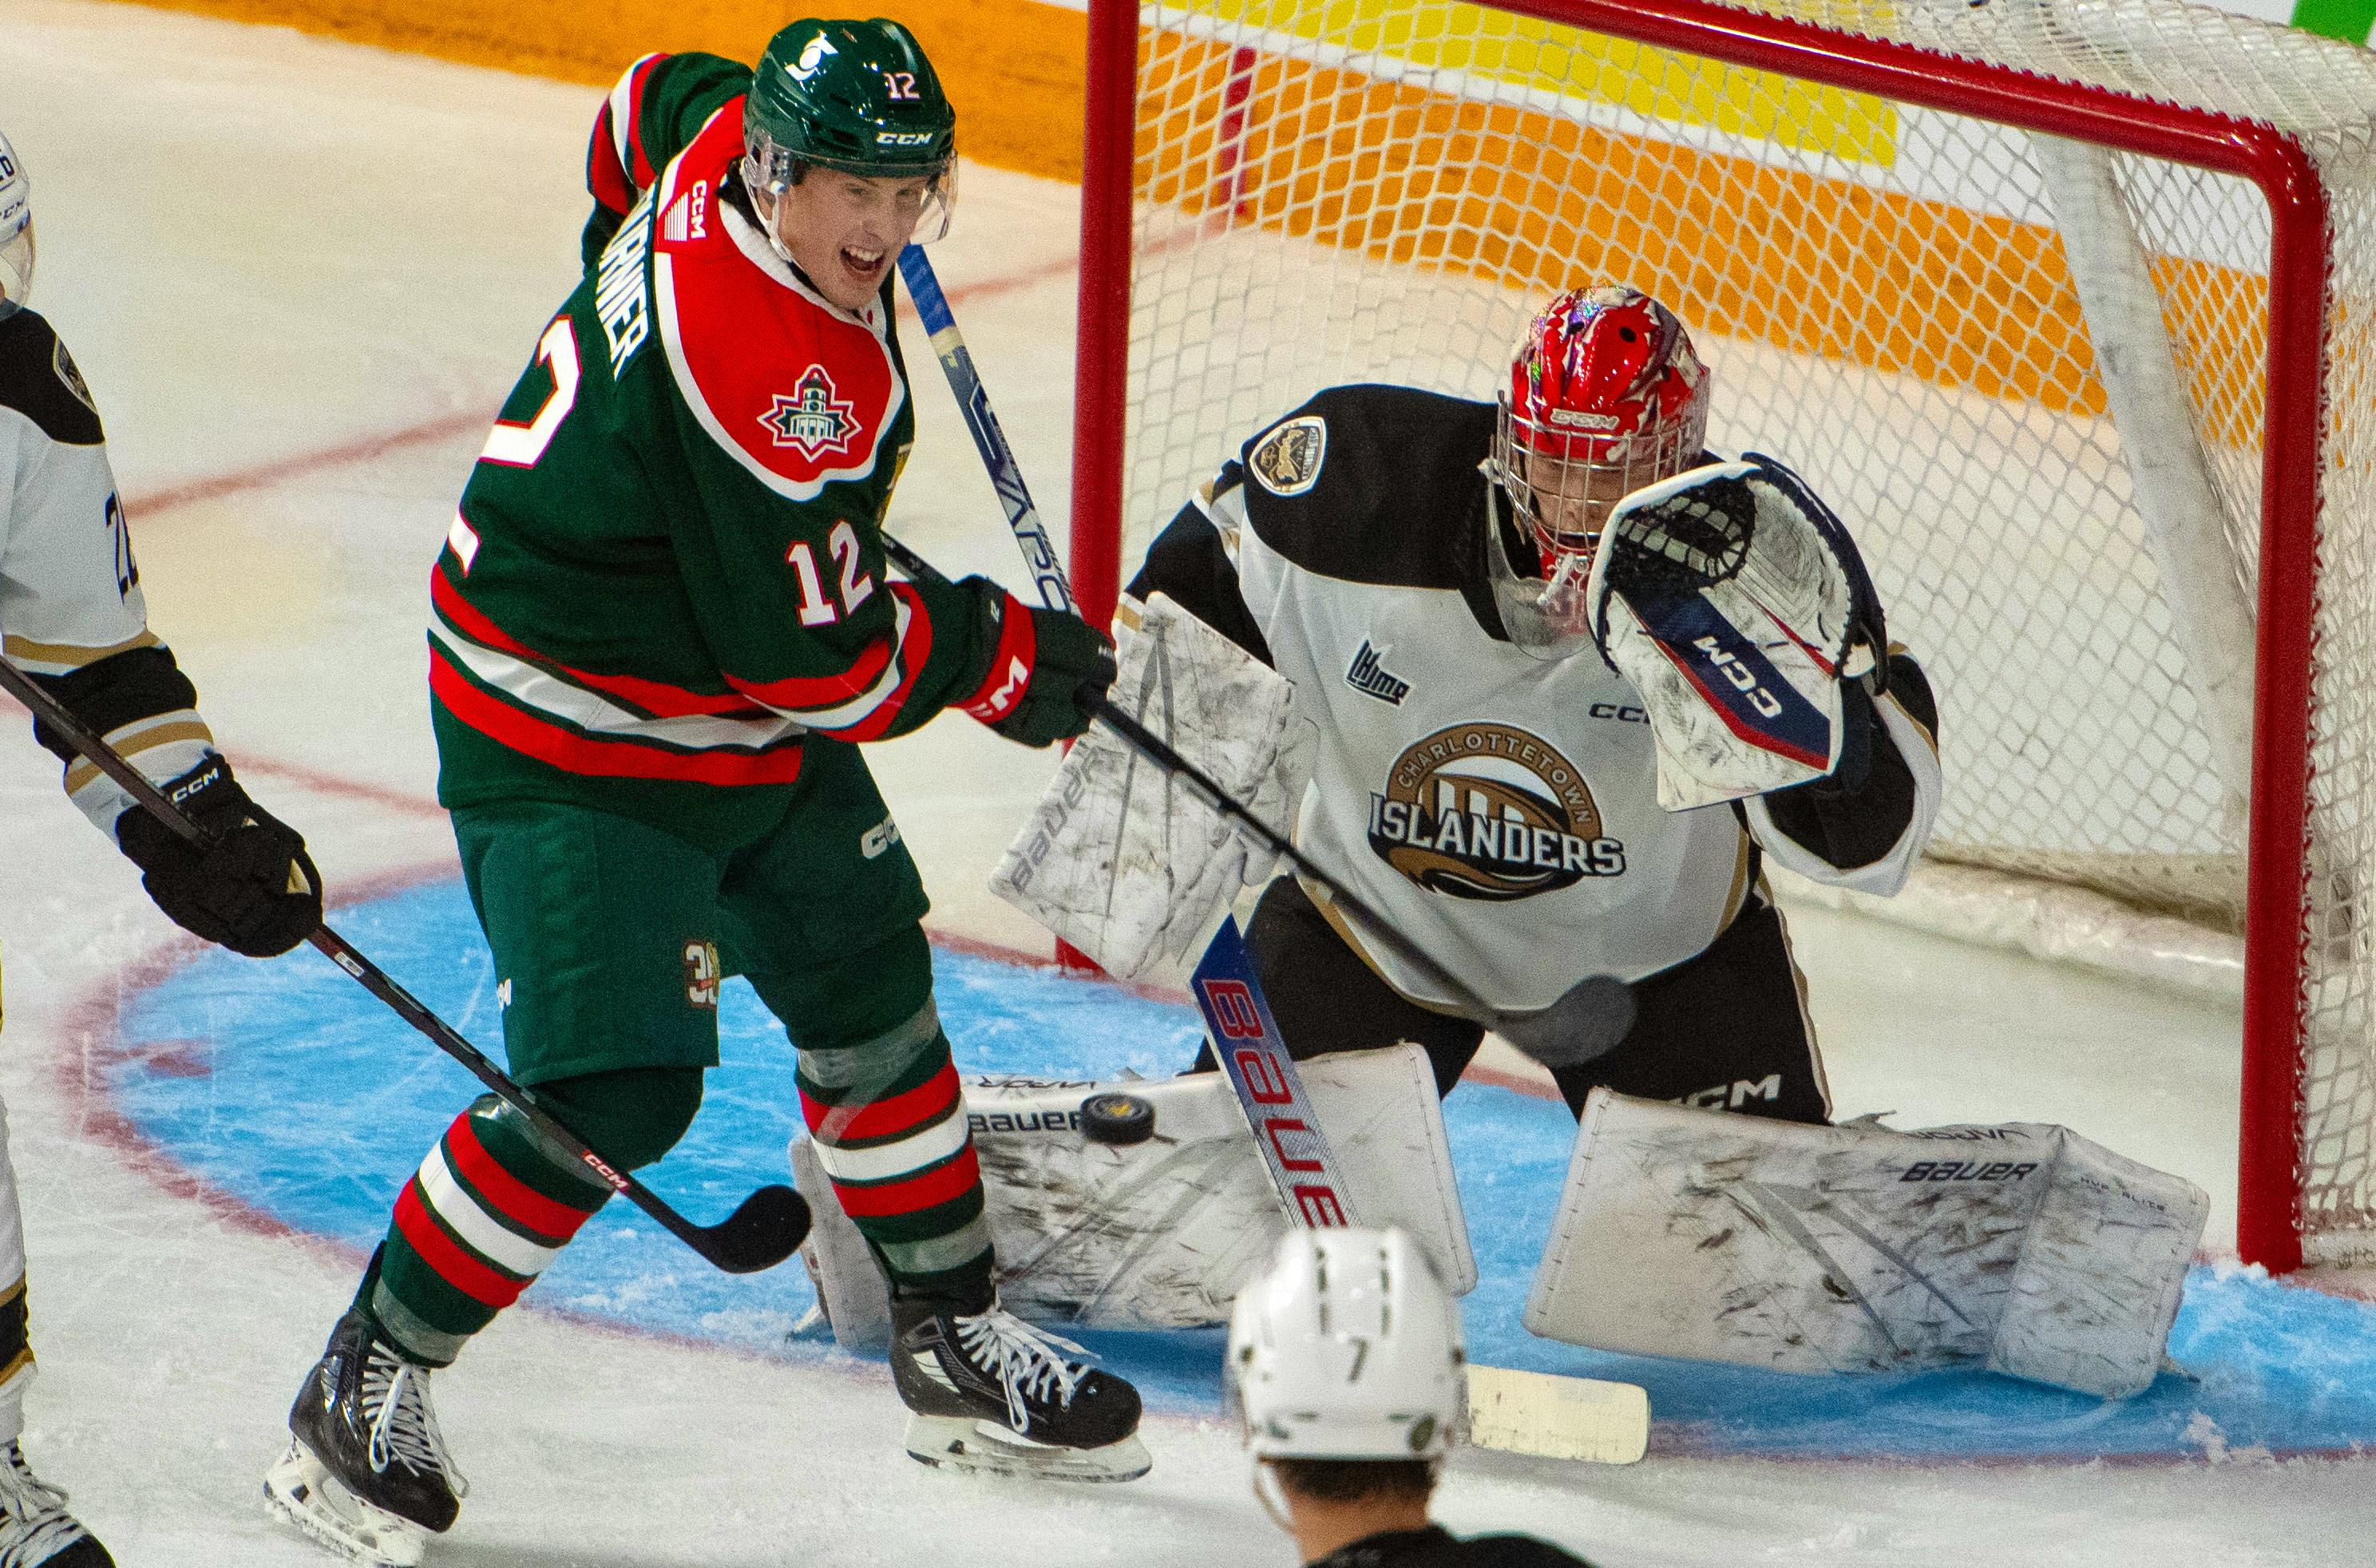 Nathan MacKinnon reflects on time with Mooseheads at jersey